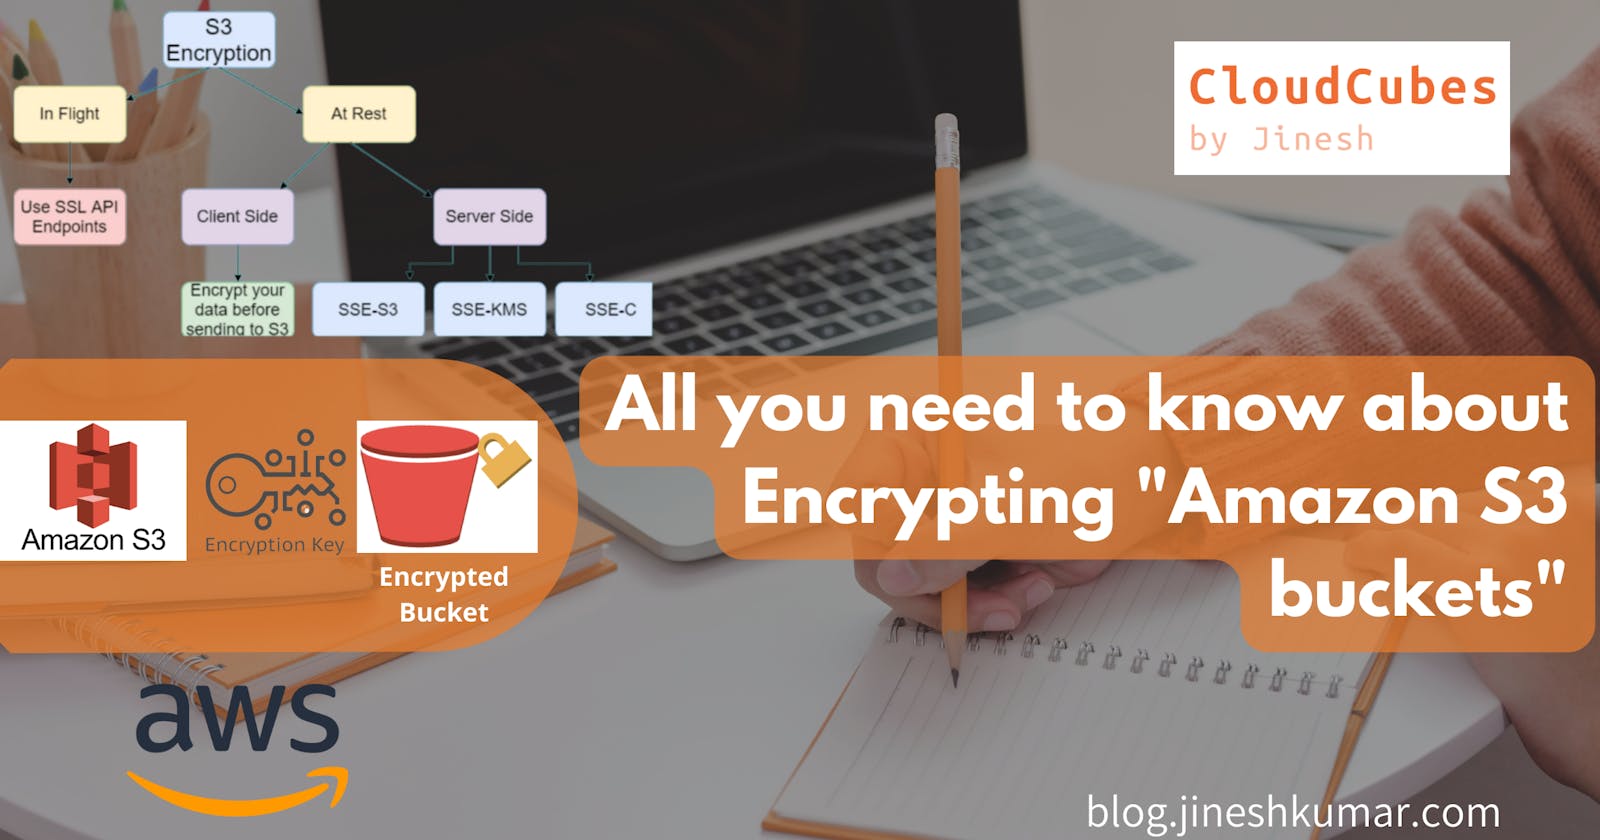 All you need to know about encrypting Amazon S3 buckets